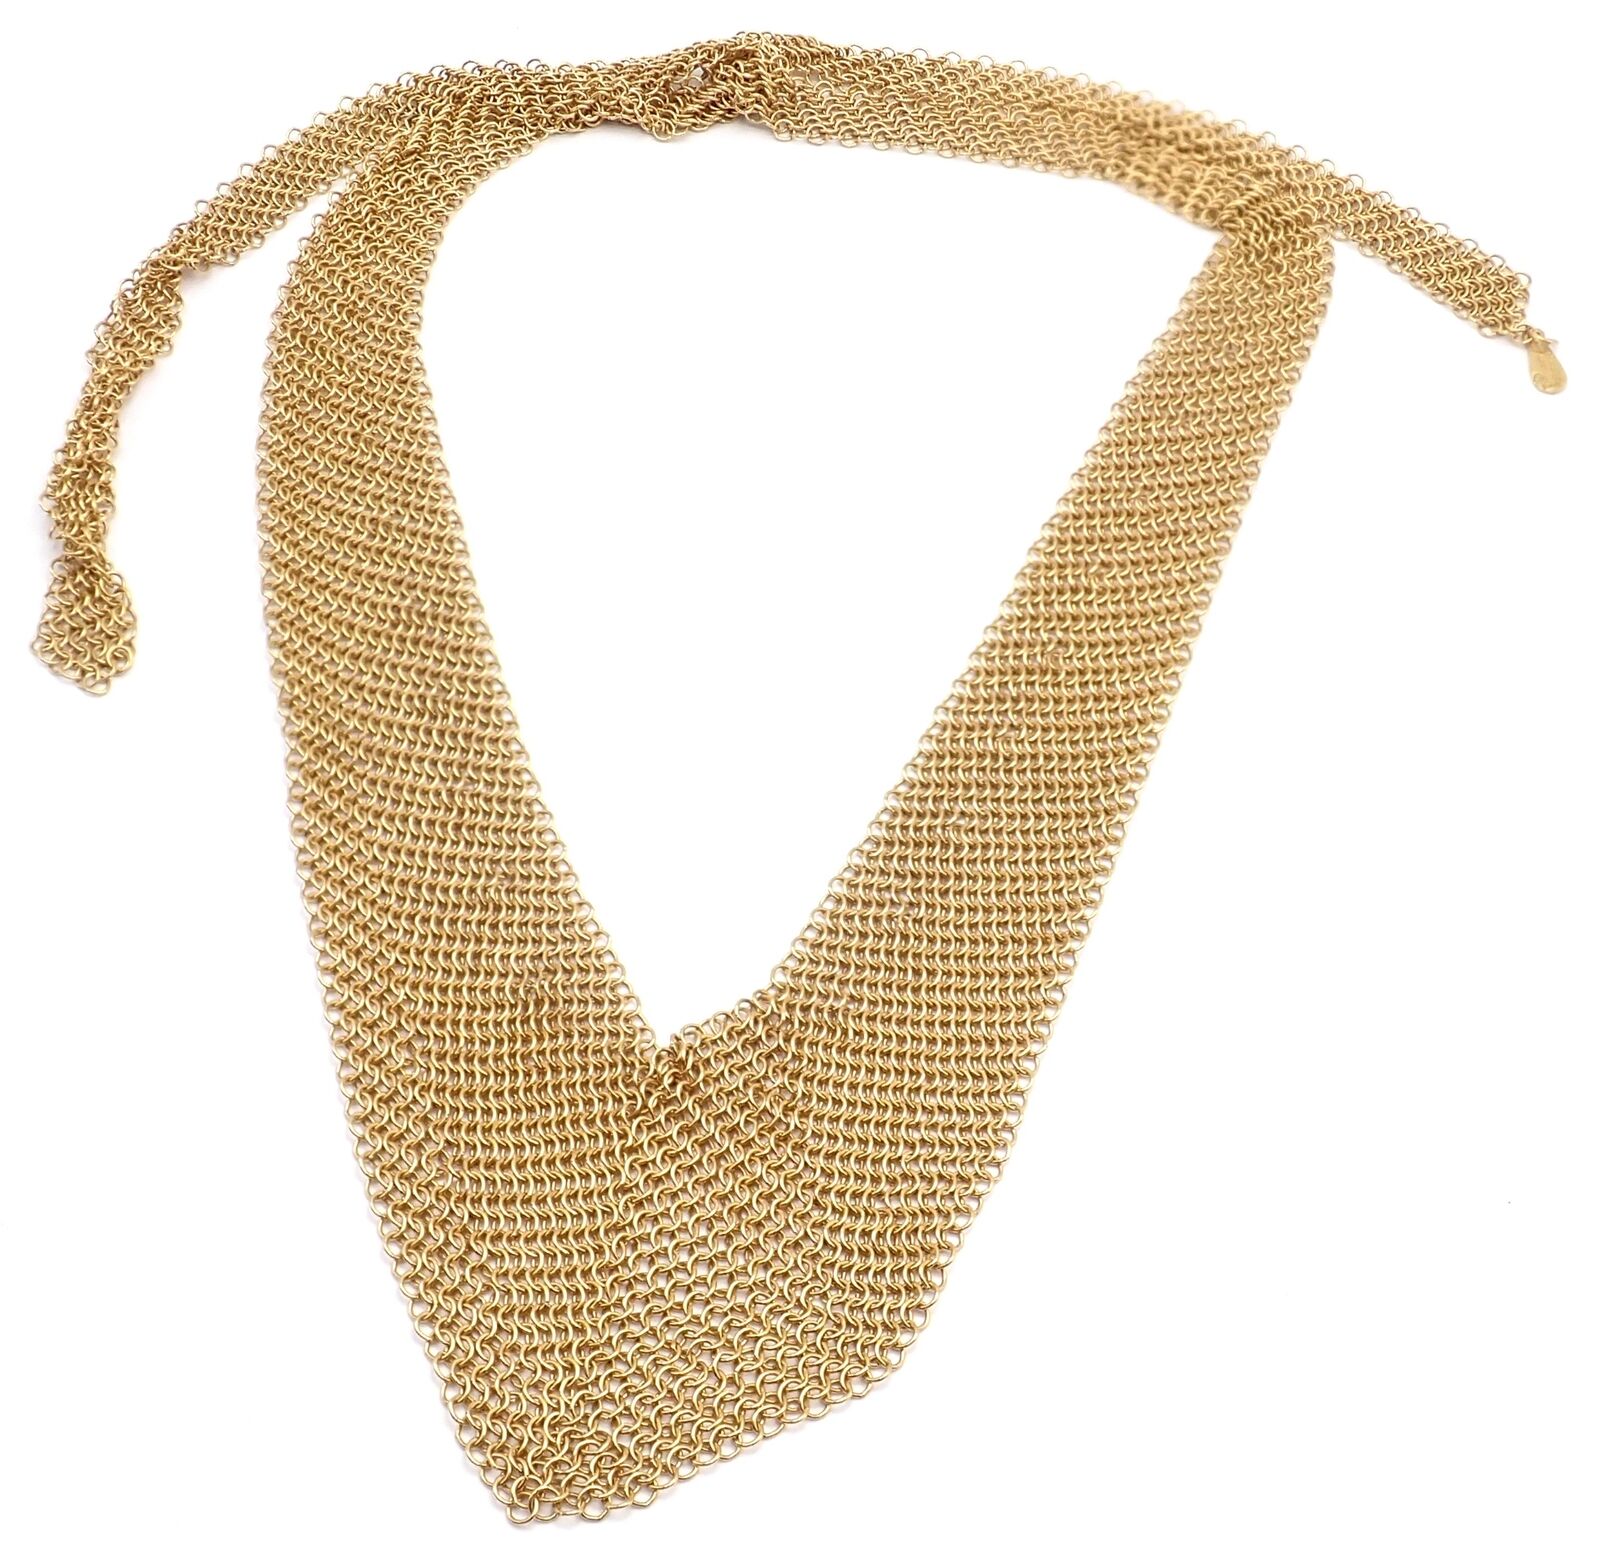 Tiffany & Co. Jewelry & Watches:Fine Jewelry:Necklaces & Pendants Vintage! Authentic Tiffany & Co Peretti 20k Yellow Gold Mesh Bib Scarf Necklace